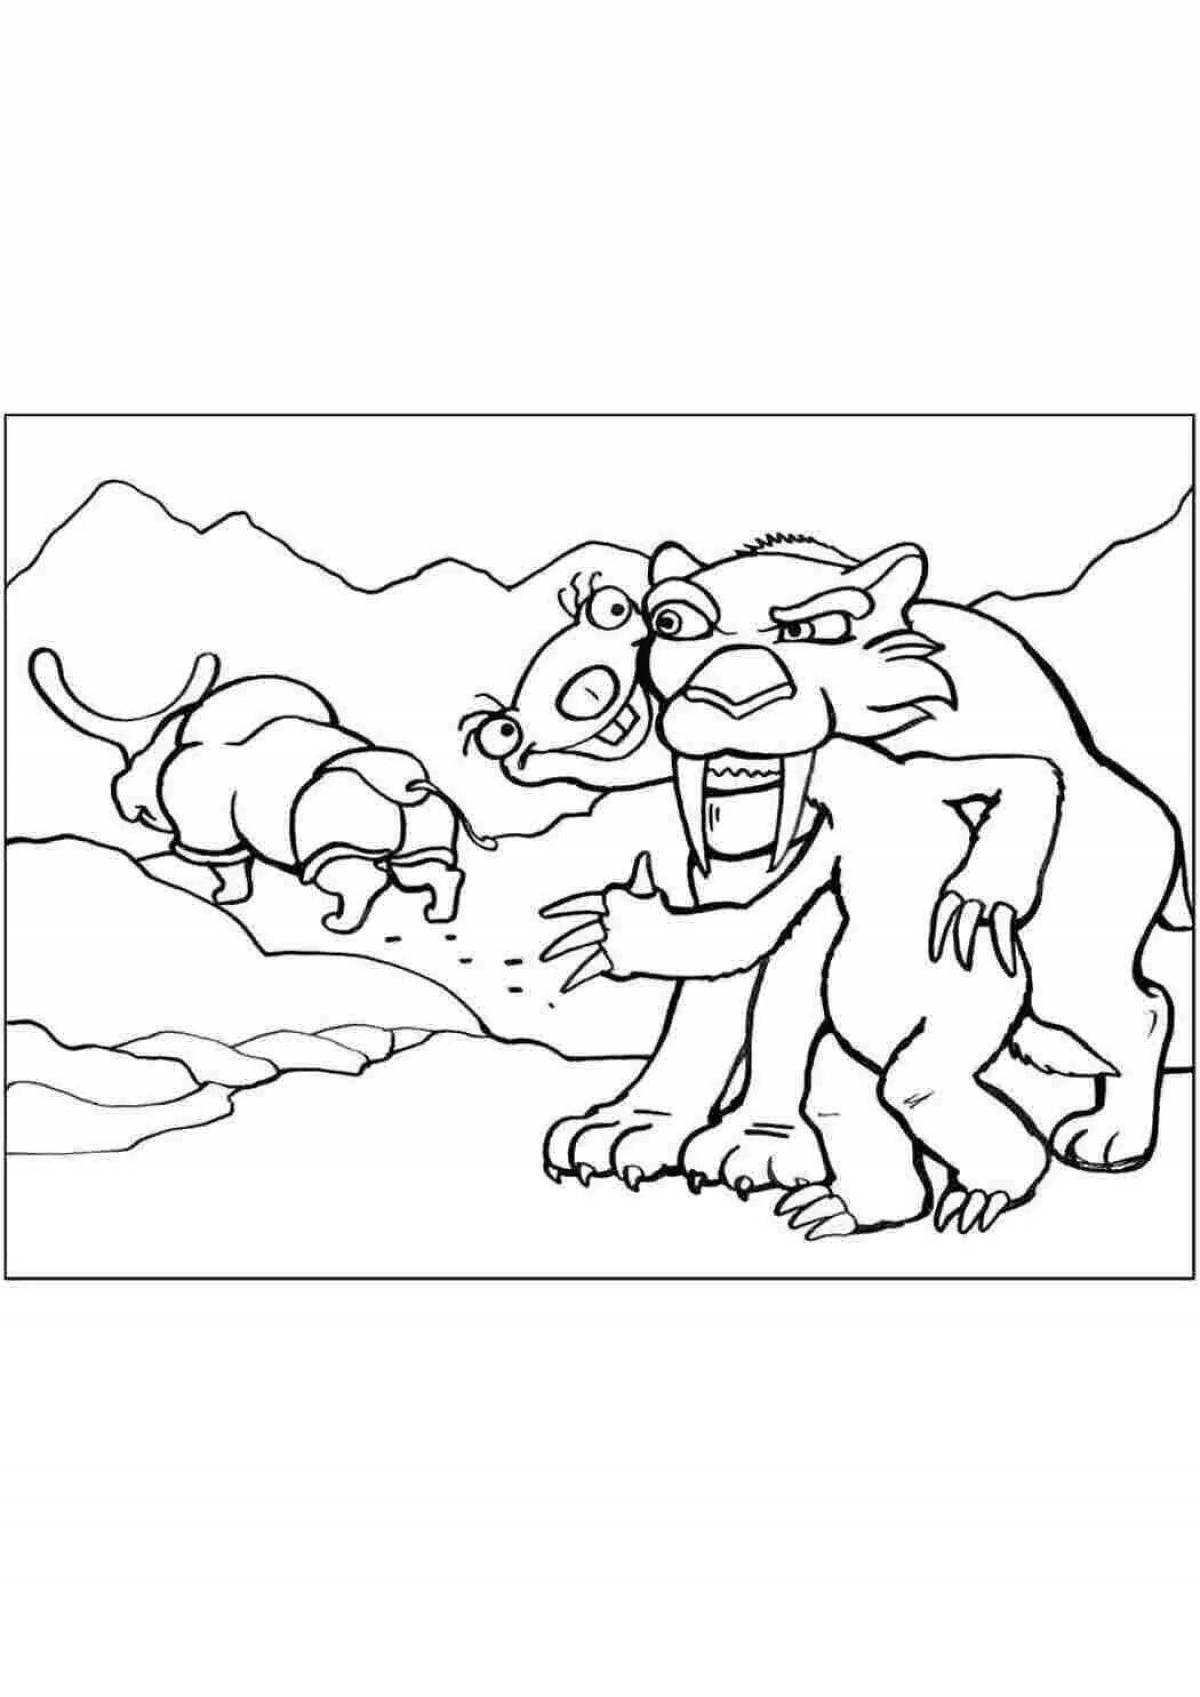 Playful ice age shira coloring page